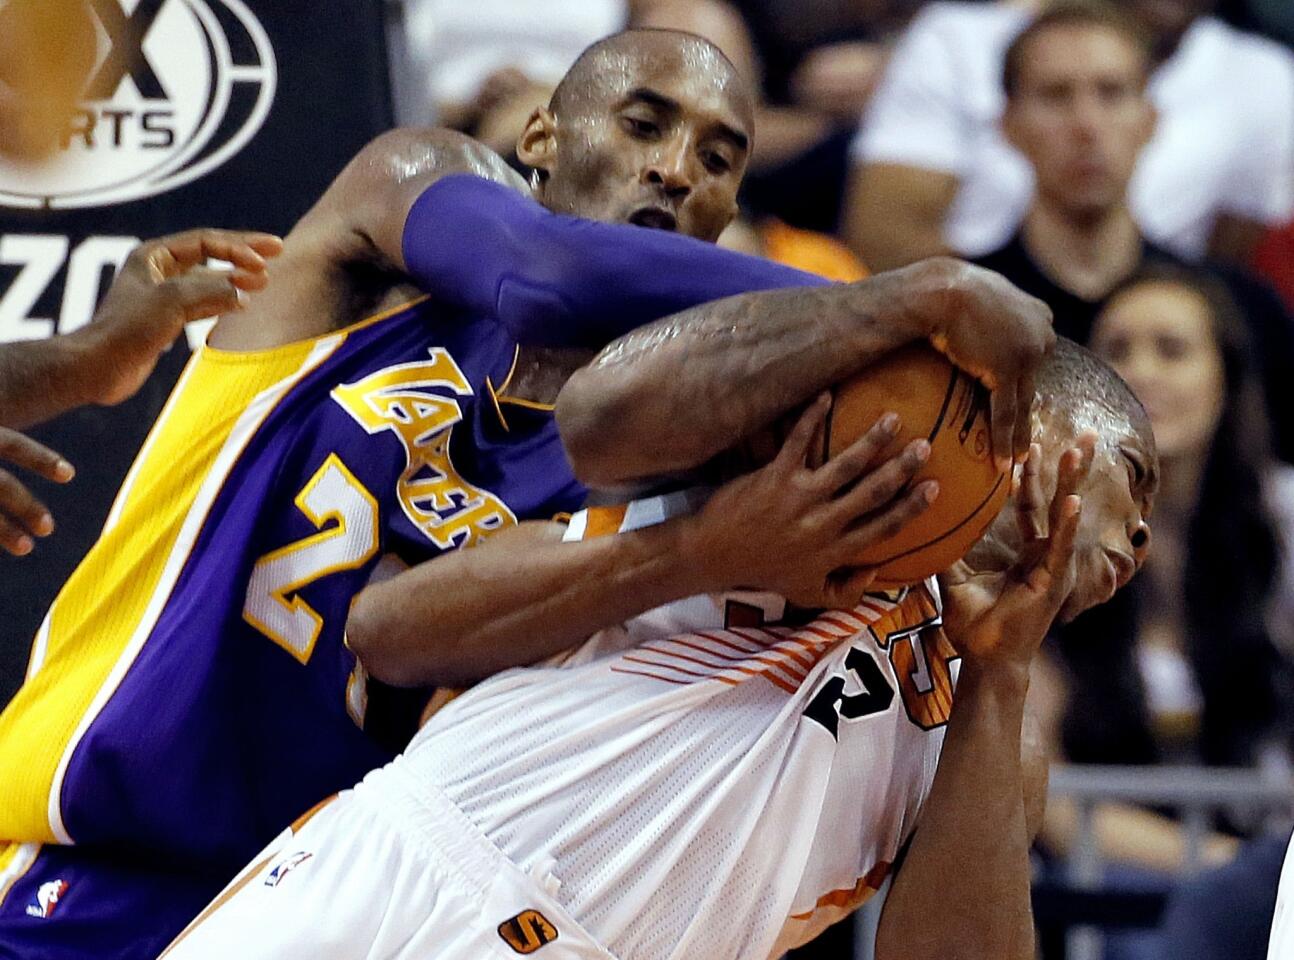 Lakers guard Kobe Bryant and Suns point guard Eric Bledsoe battle for the ball in the second half.